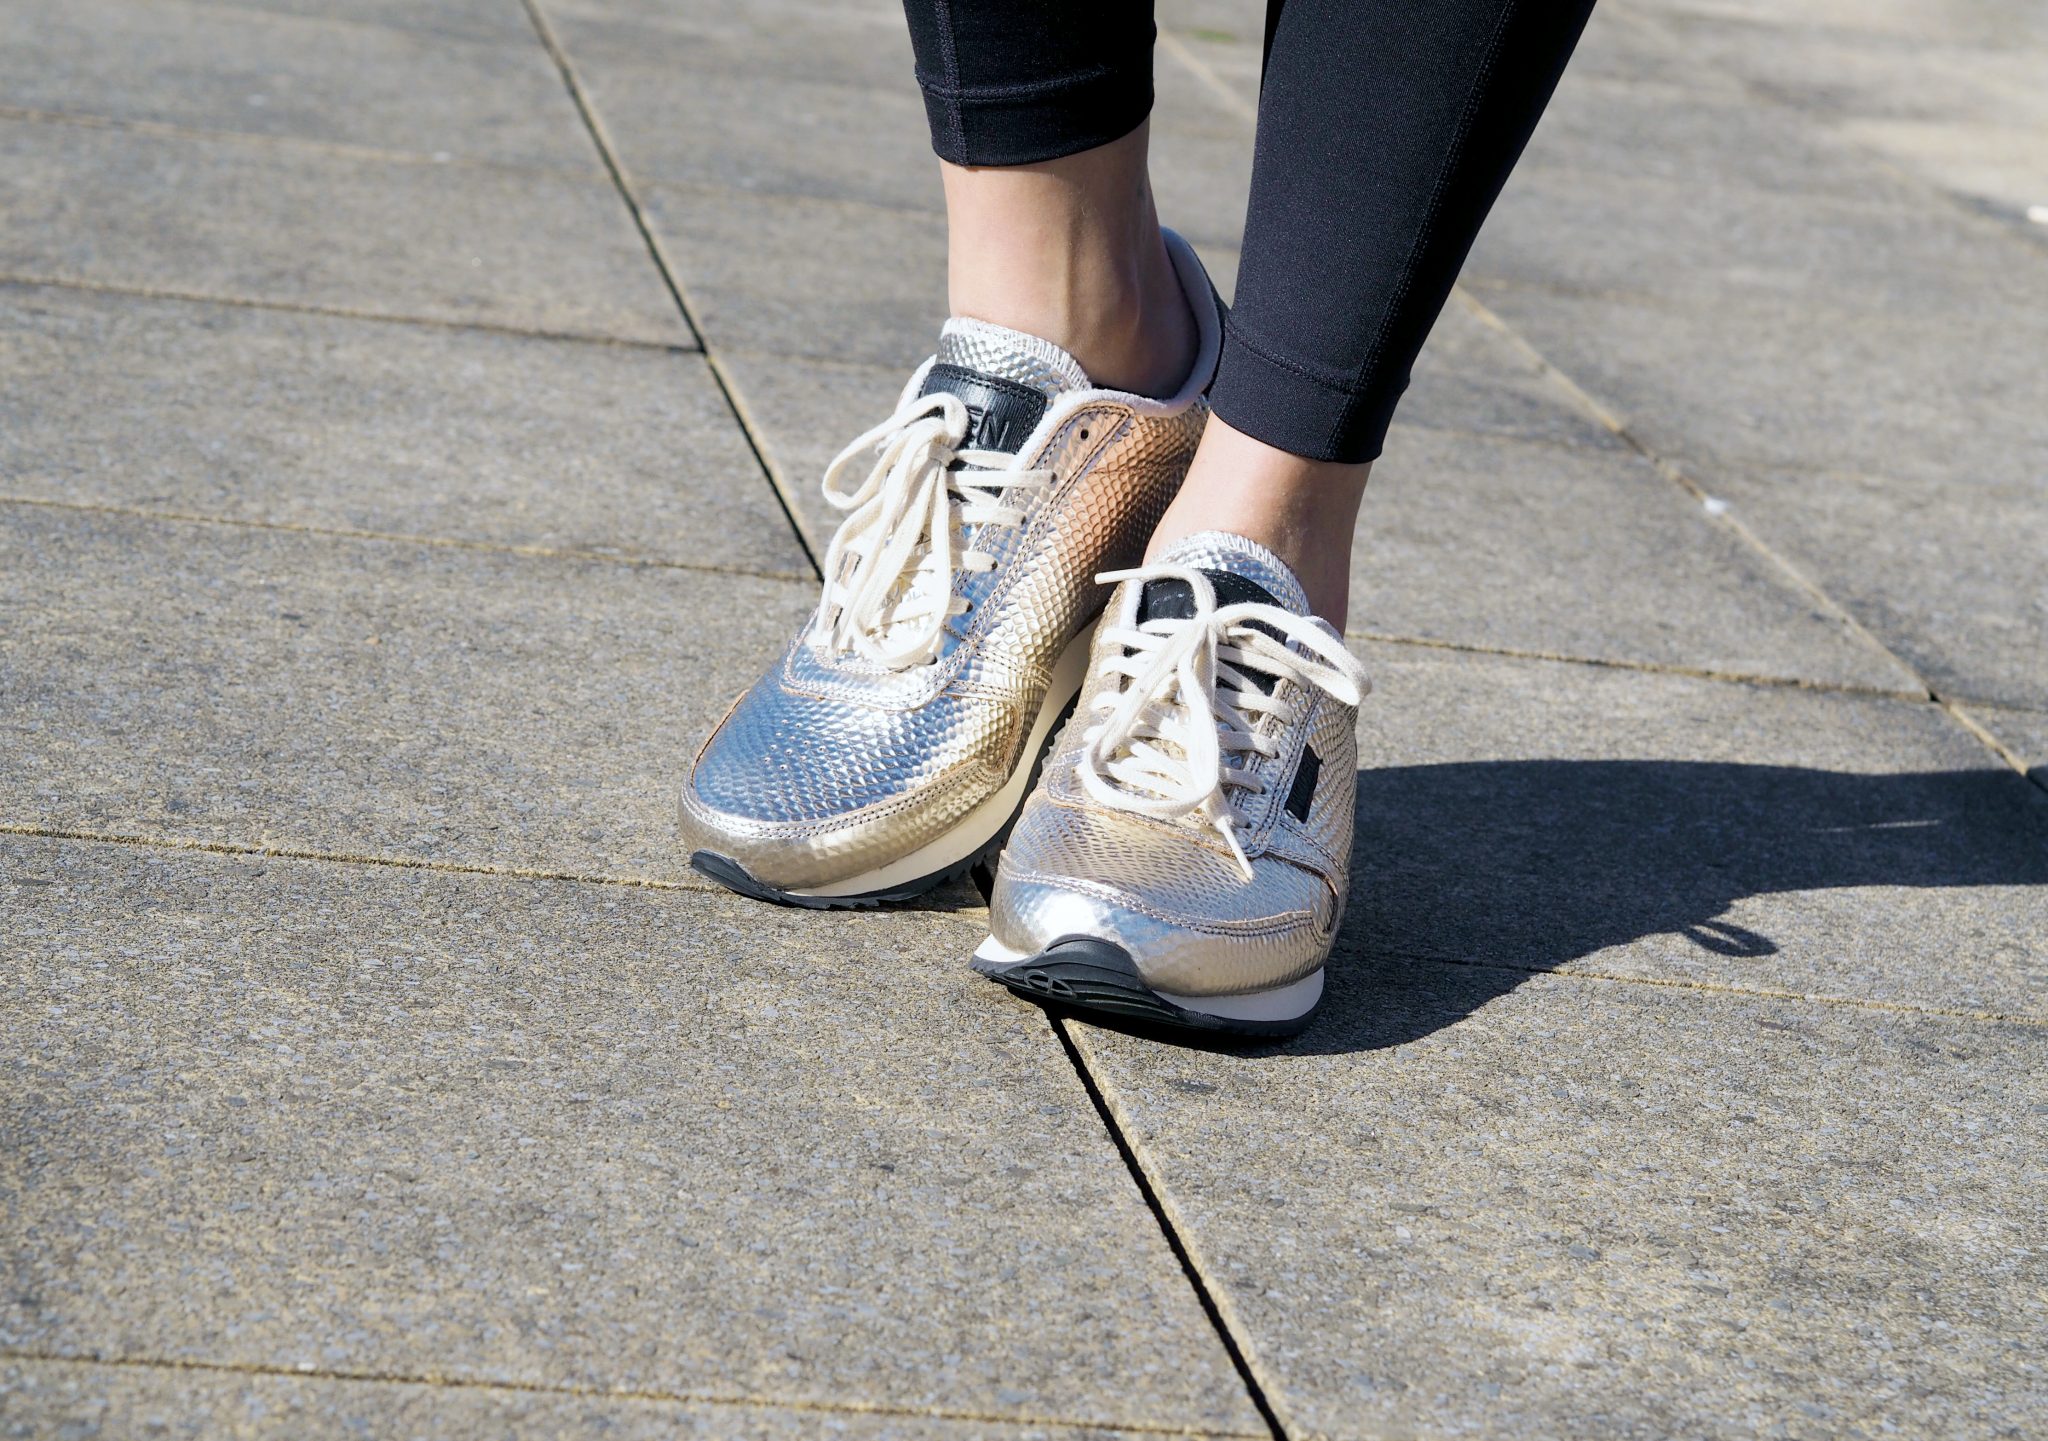 Woden metallic trainers from Tessuti | Manchester based fashion and lifestyle blogger - outfit post